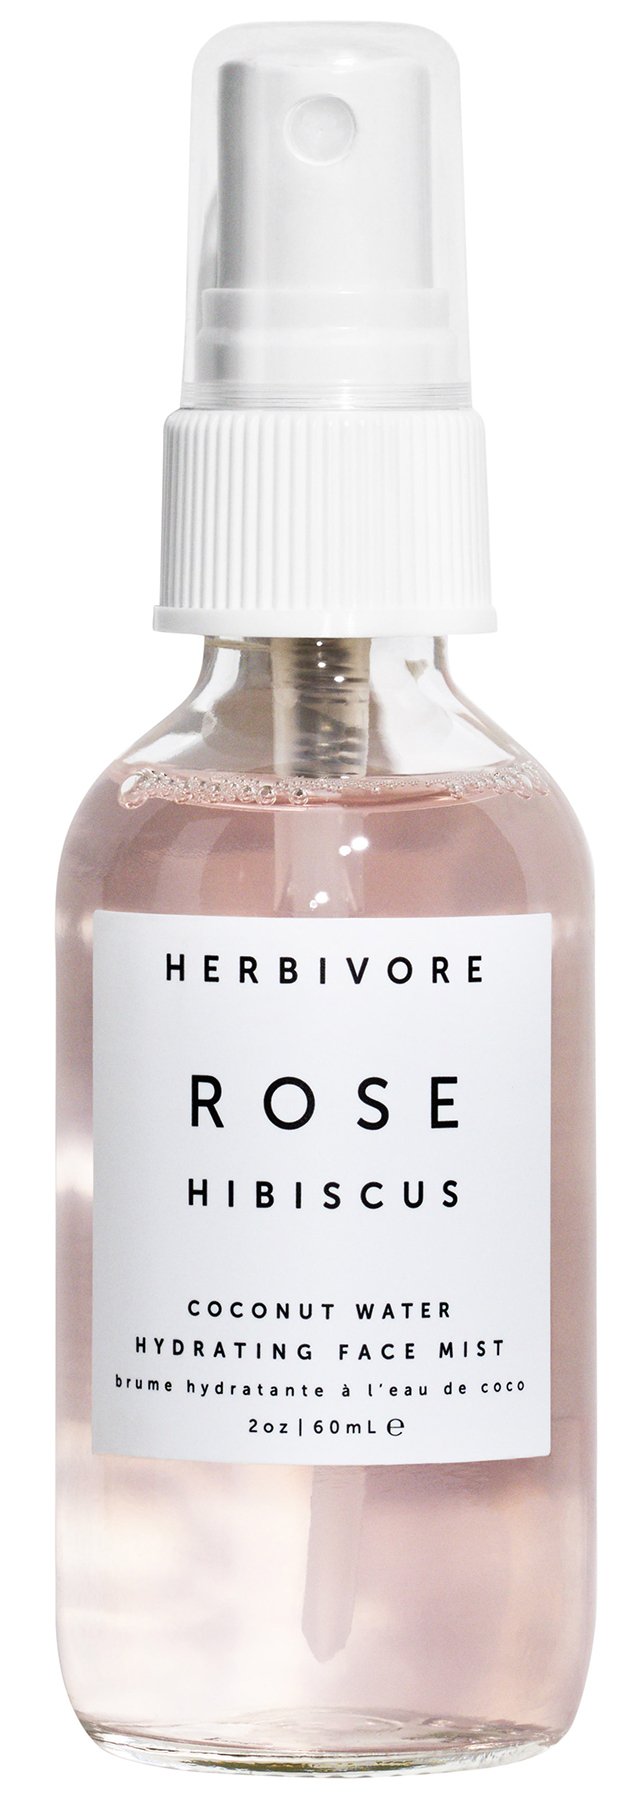 Natural Rose Hibiscus Hydrating Face Mist